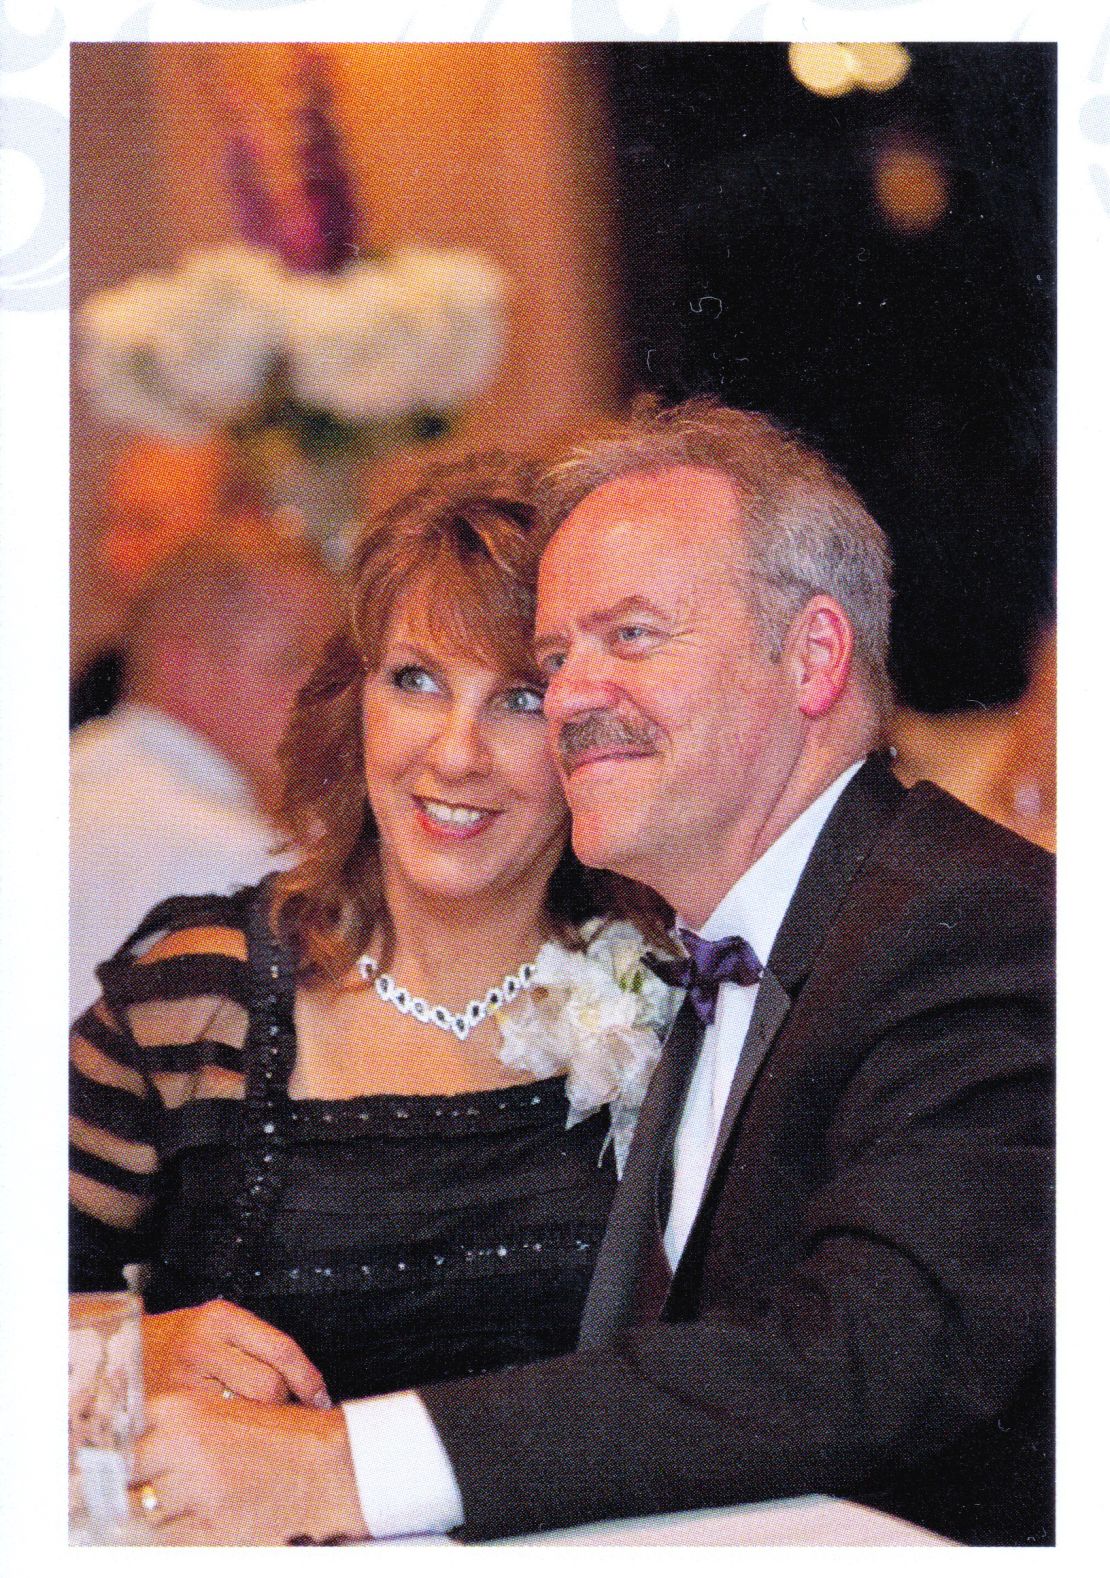 Jim and Leeanne Mills at the 2014 wedding of their daughter. Leeanne Mills died in hospice care in August 2016.